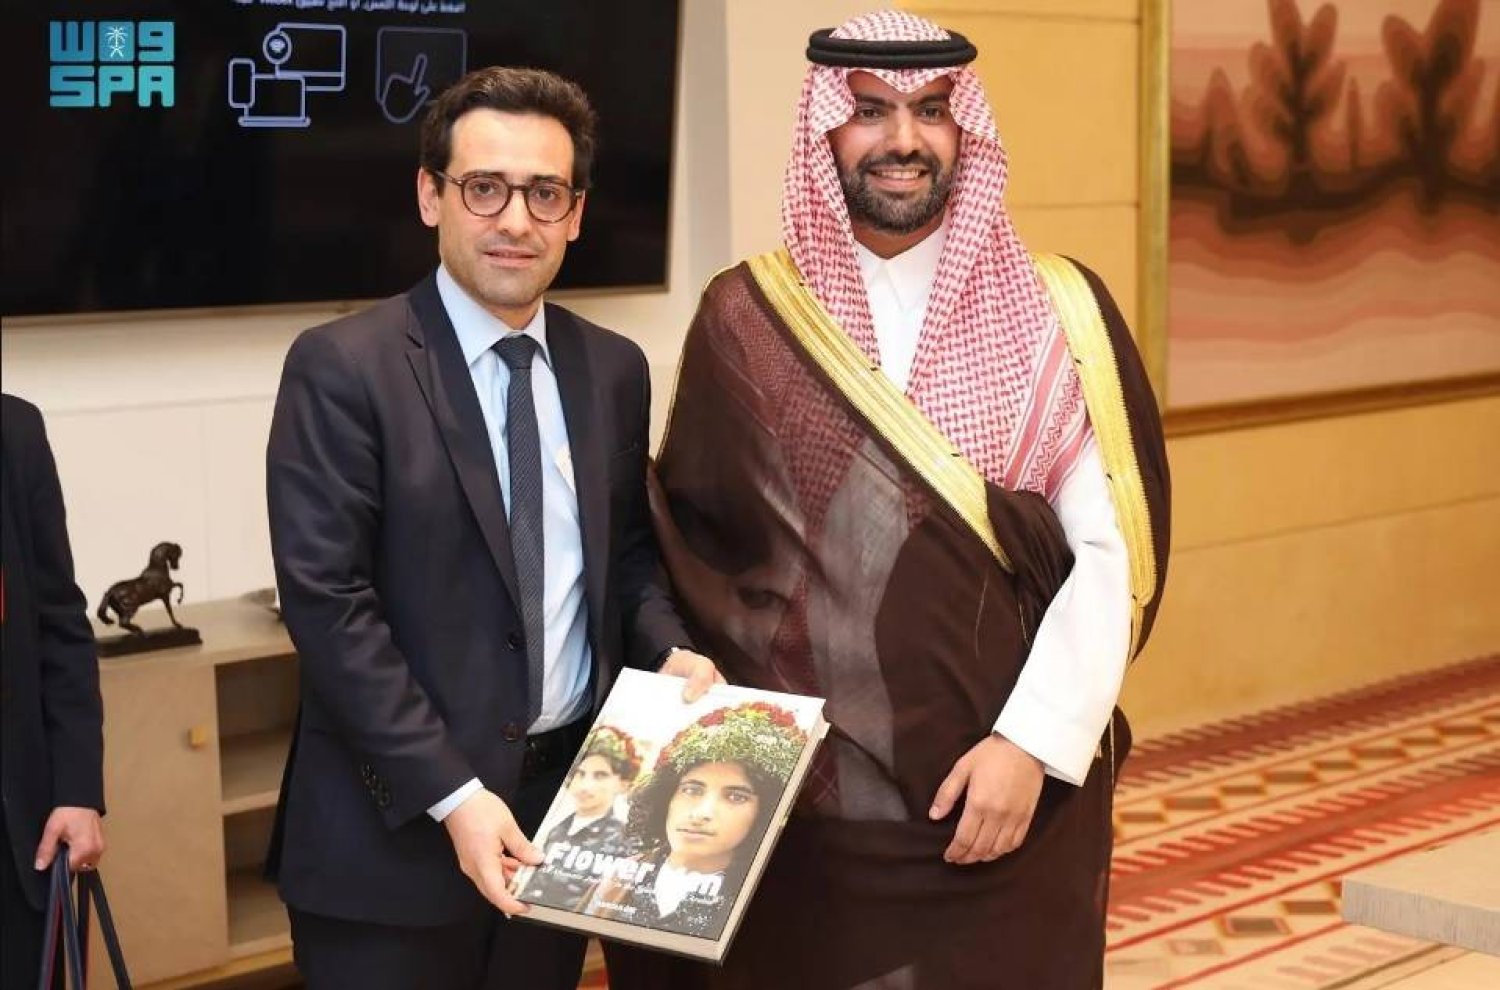 Saudi Minister of Culture Prince Badr bin Abdullah bin Farhan met in Diriyah with French Minister for Europe and Foreign Affairs Stephane Séjournet. SPA